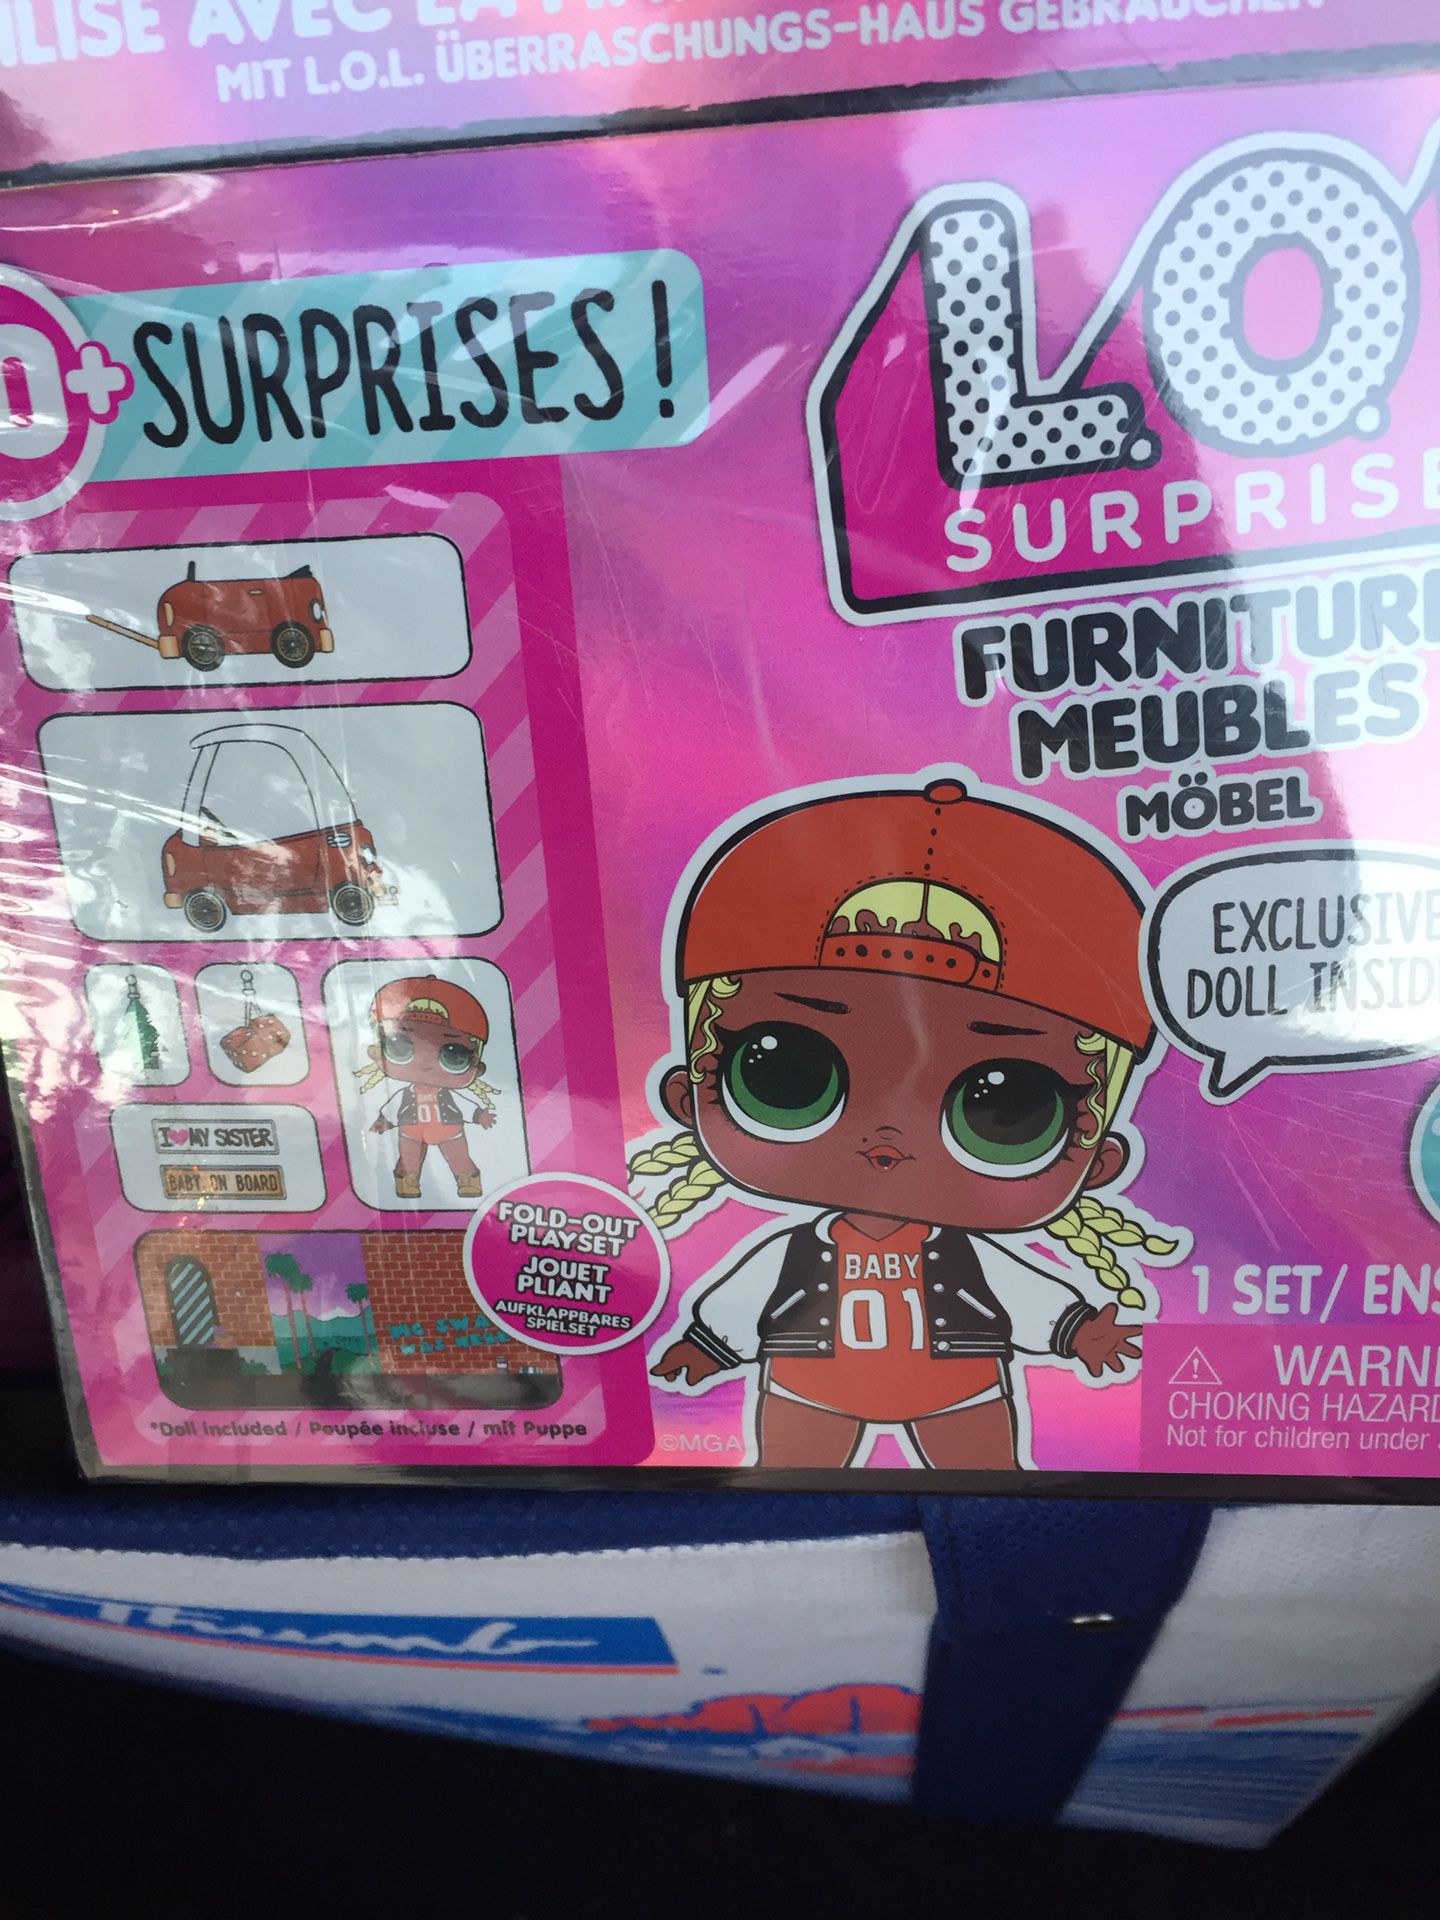 LOL SURPRISE FURNITURE MEUBLES DOLL INCLUDED